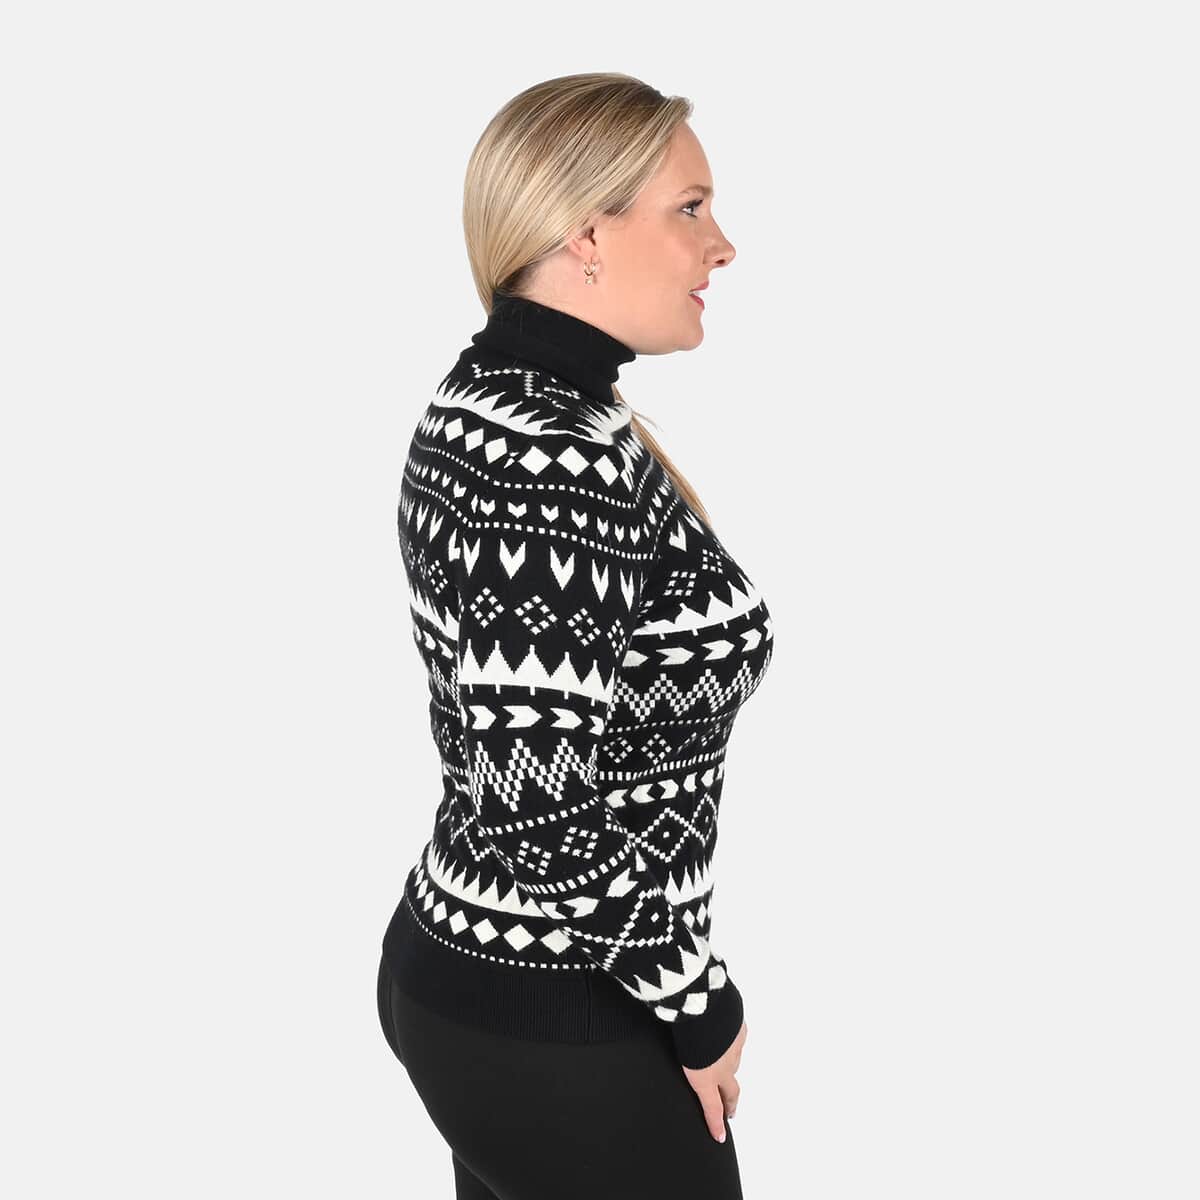 TAMSY Black Knit Turtle Neck with Chevron Pattern - L image number 2